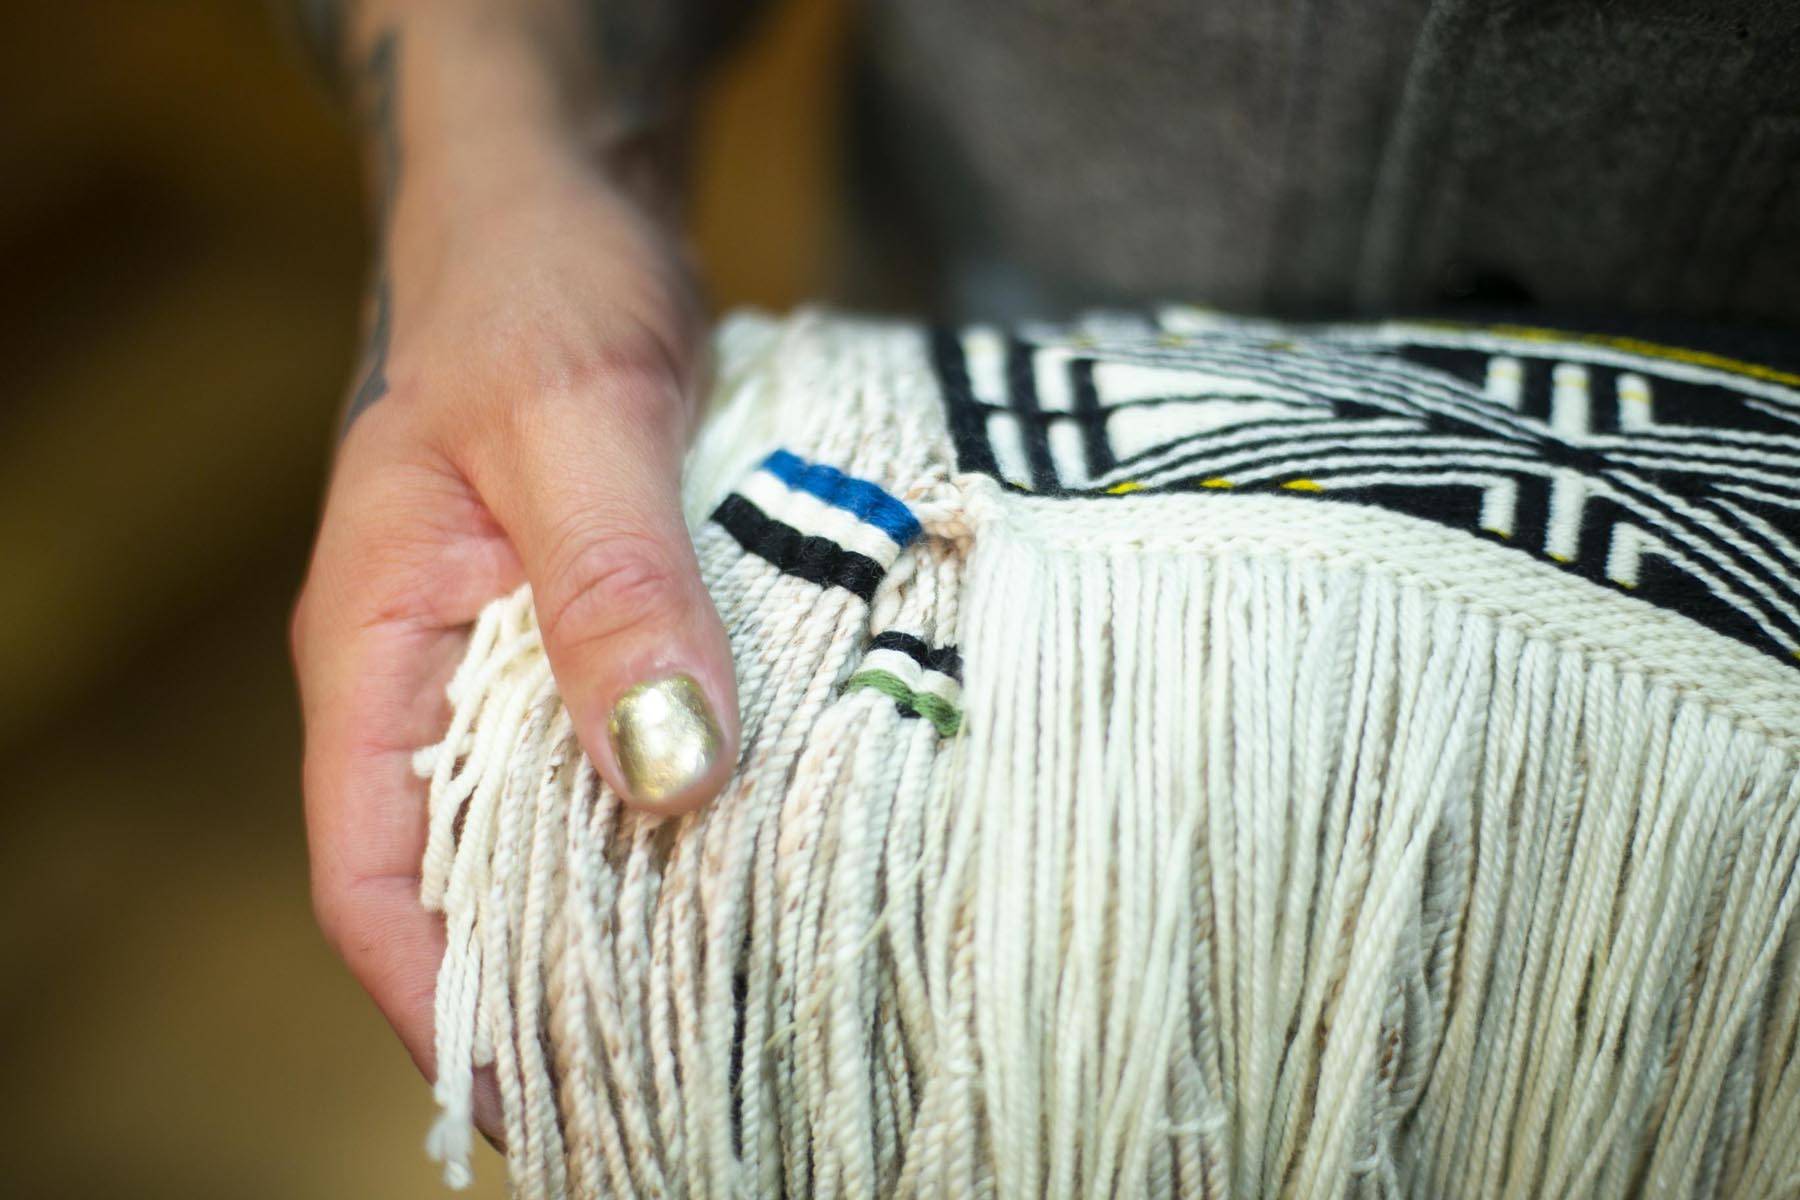 Ricky Tagaban shows the woven artist signatures on the robe he and Lily Hope collaborated to weave at its first dance ceremony at the Sealaska Heritage Institute on Monday, June 22, 2020. (Courtesy photo | Annie Bartholomew)